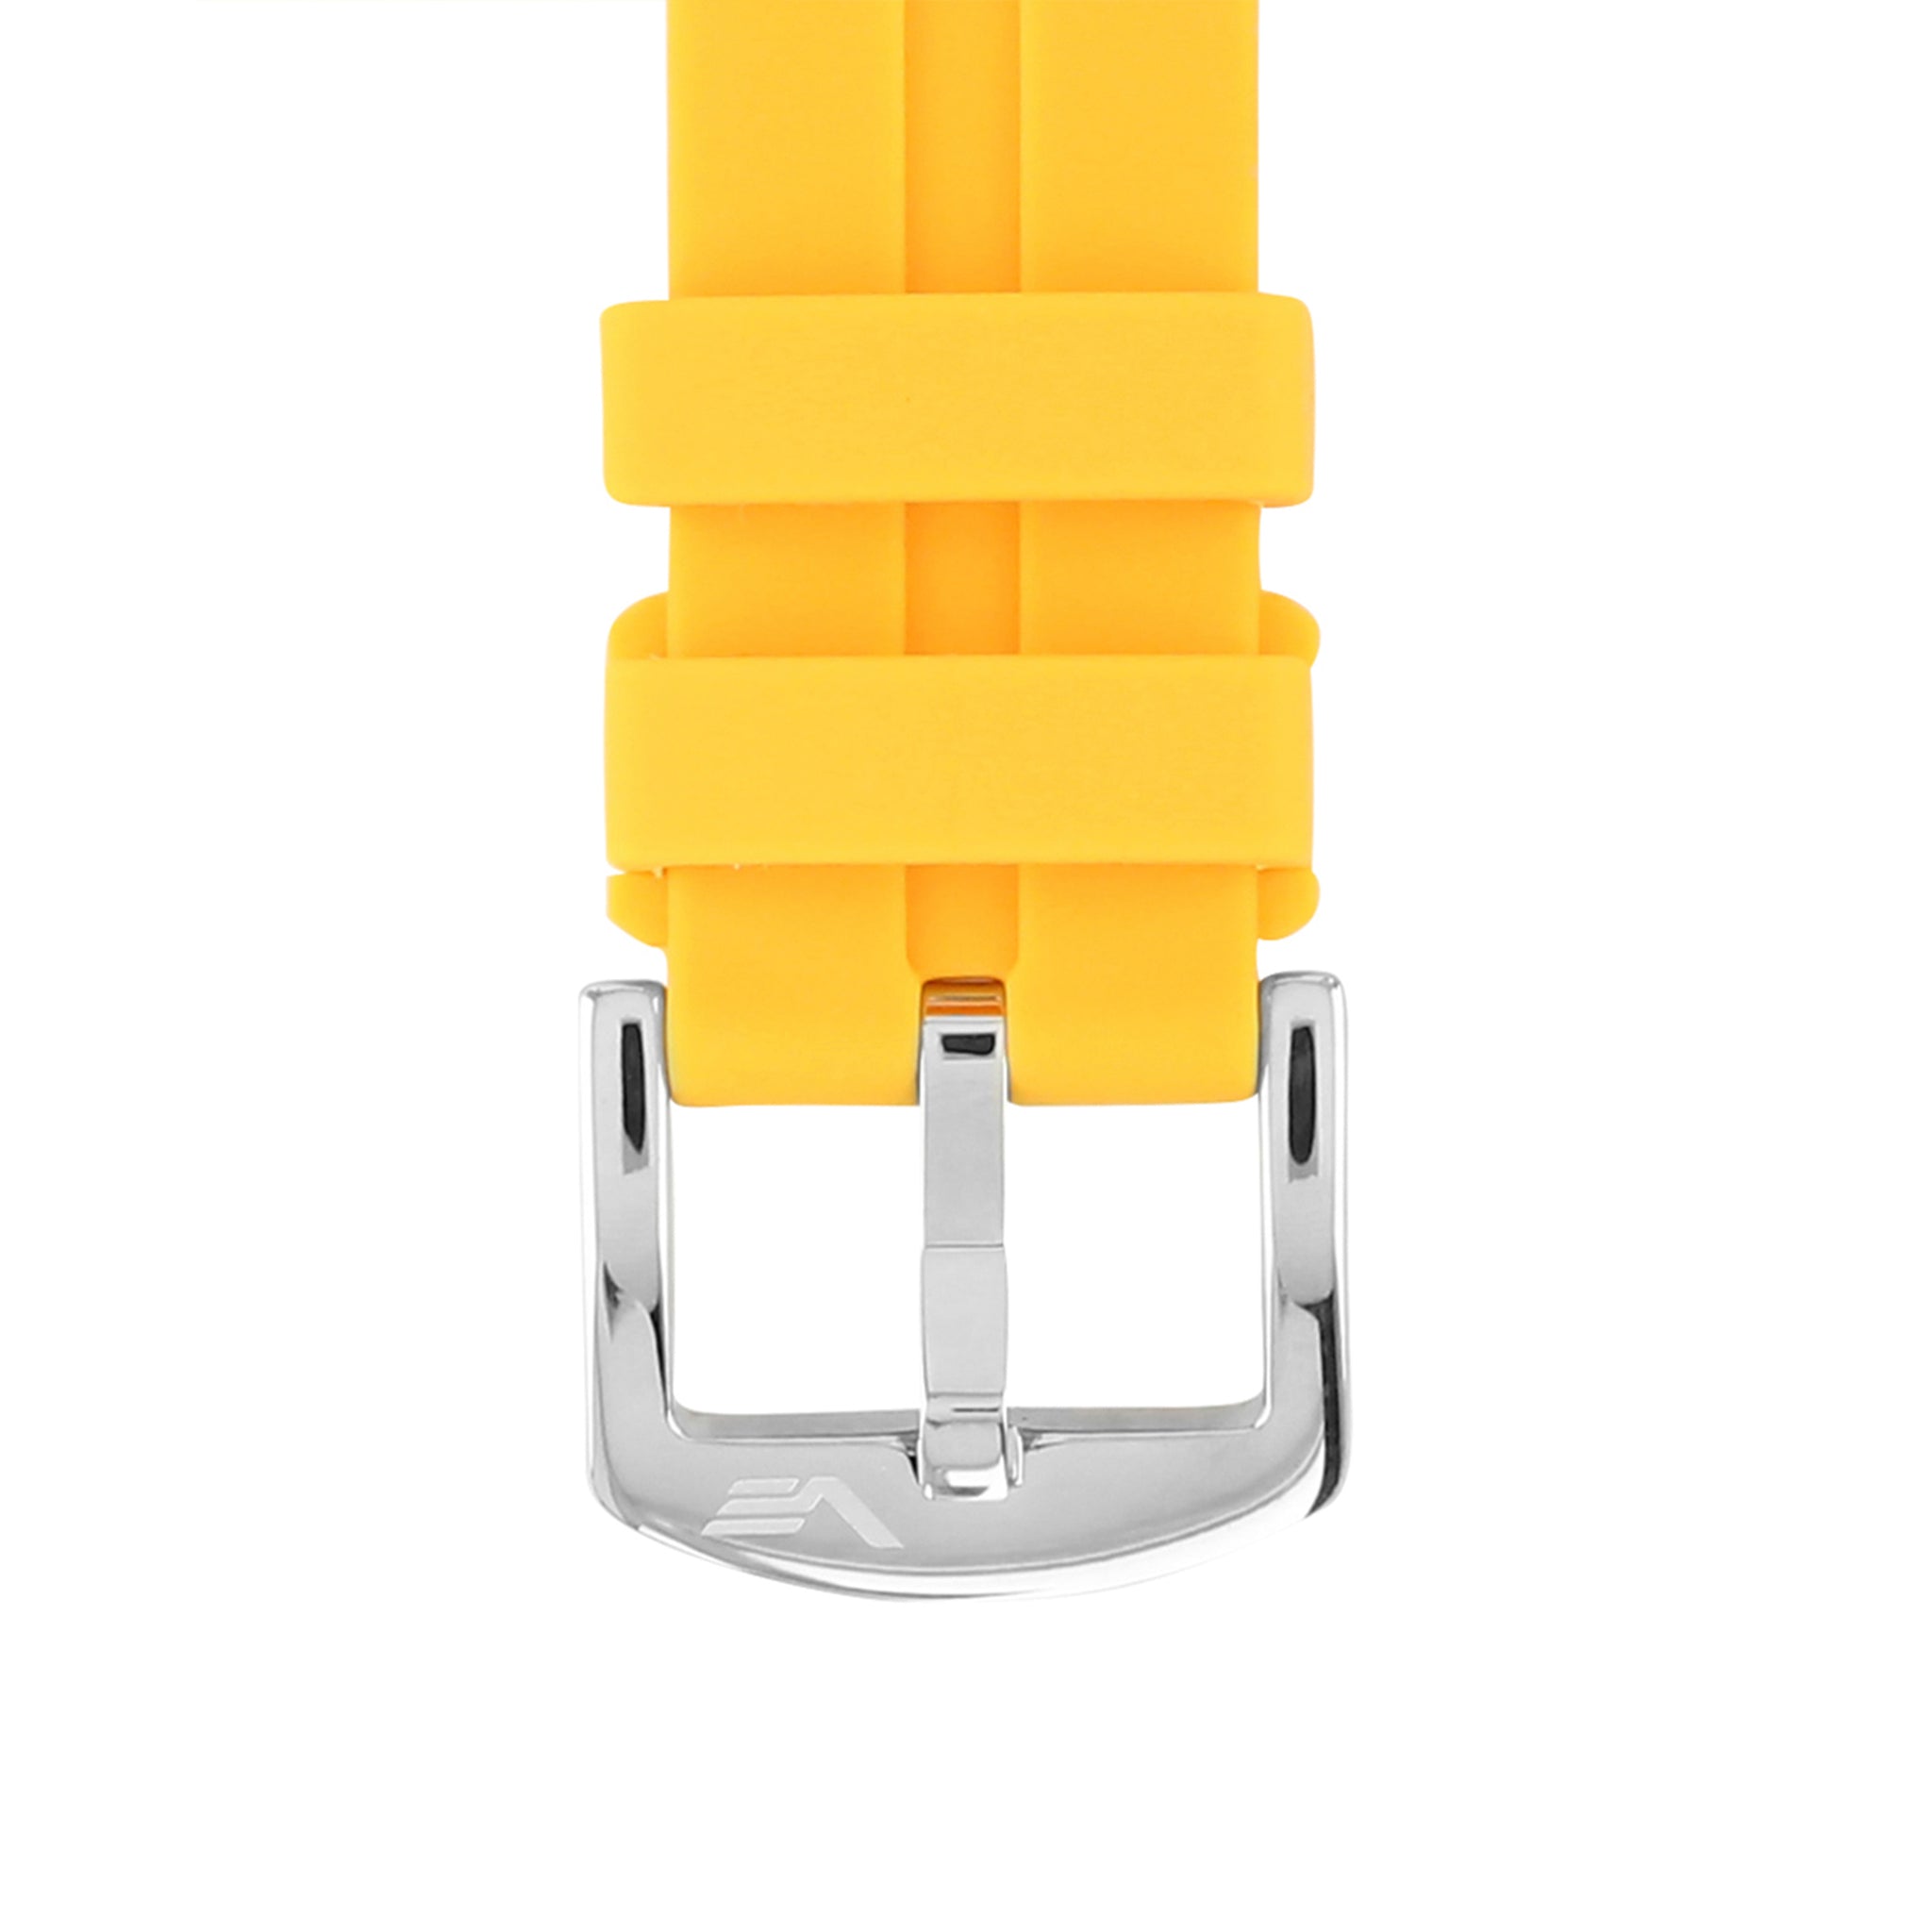 ALMAZ / EXPEDITION YELLOW SILICONE STRAP 22mm - POLISHED BUCKLE